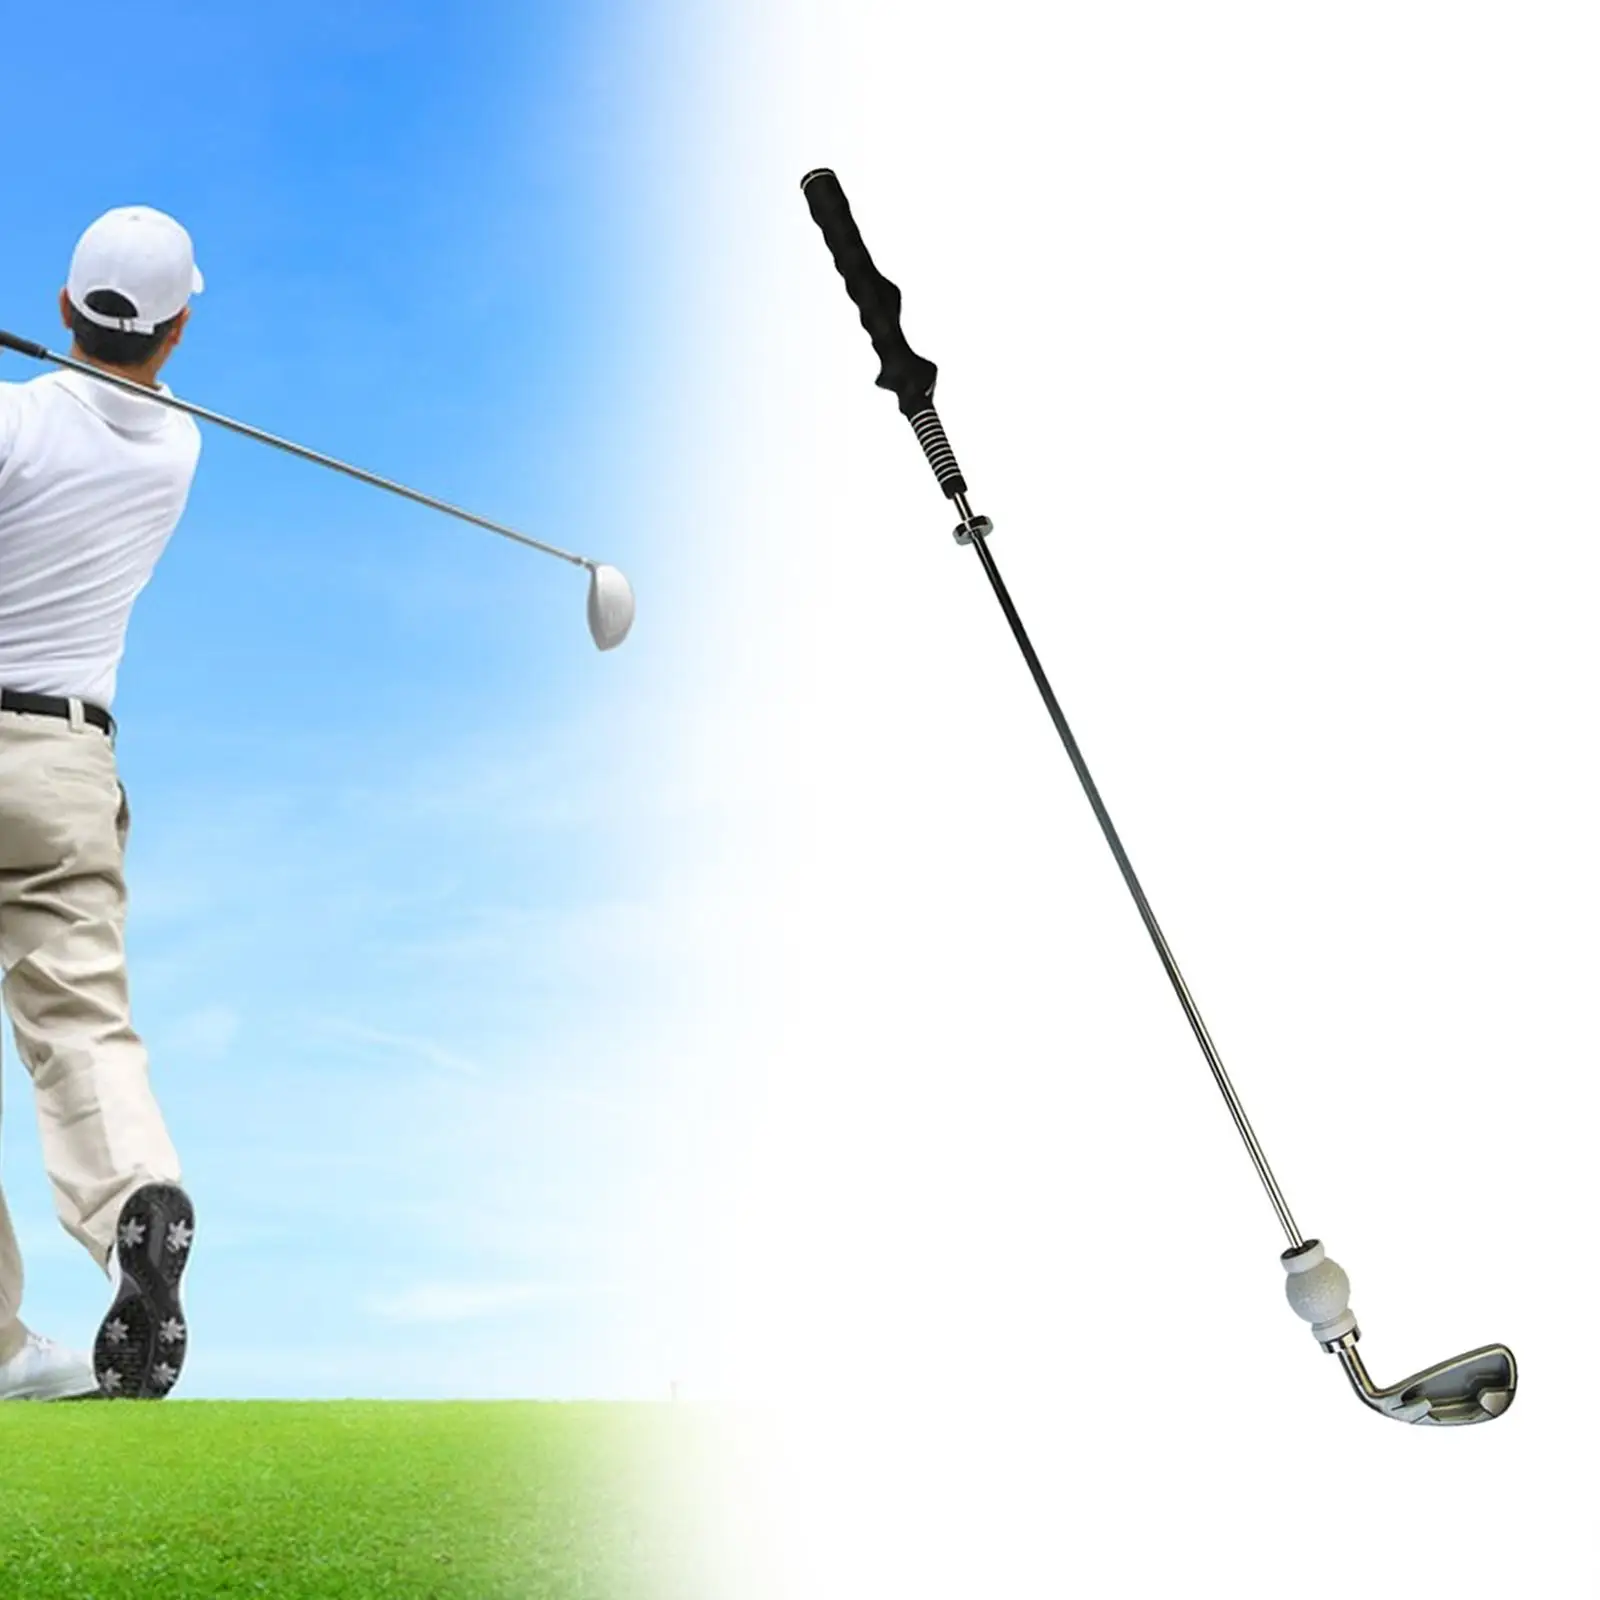 

Golf Swing Trainer Golf Practice Stick Portable Equipment Auxiliary Improve Swing Skills Training Stick for Balance Tempo